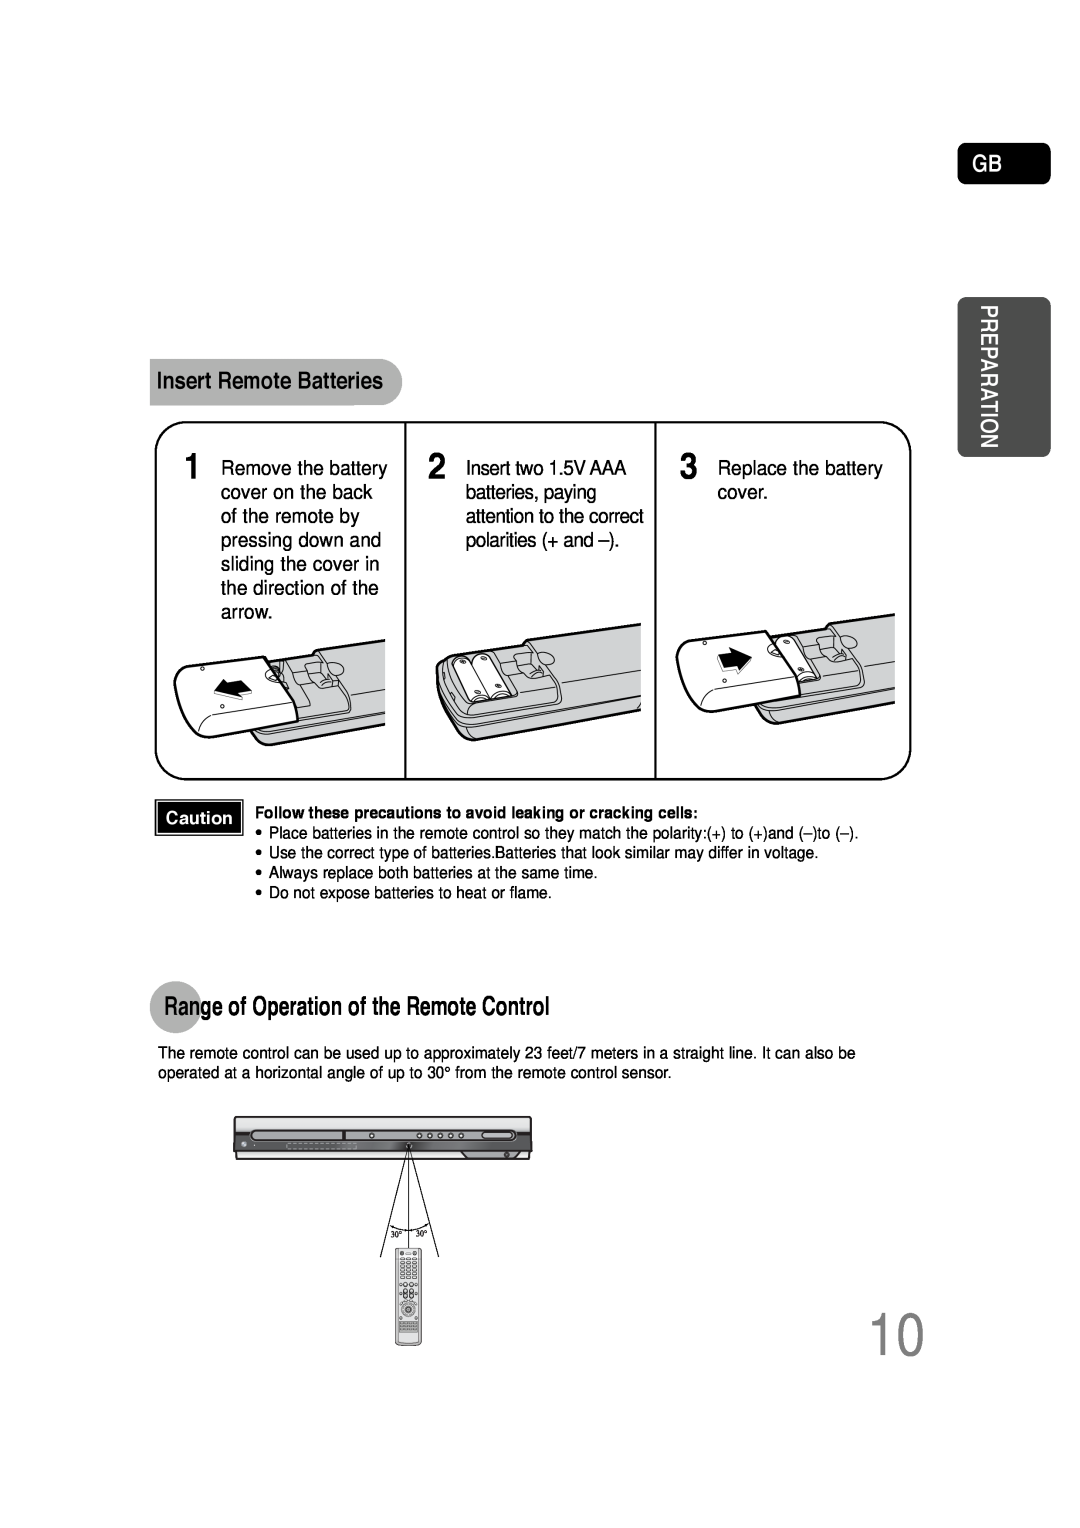 Samsung HT-P30 instruction manual Range of Operation of the Remote Control, Insert Remote Batteries, Preparation 